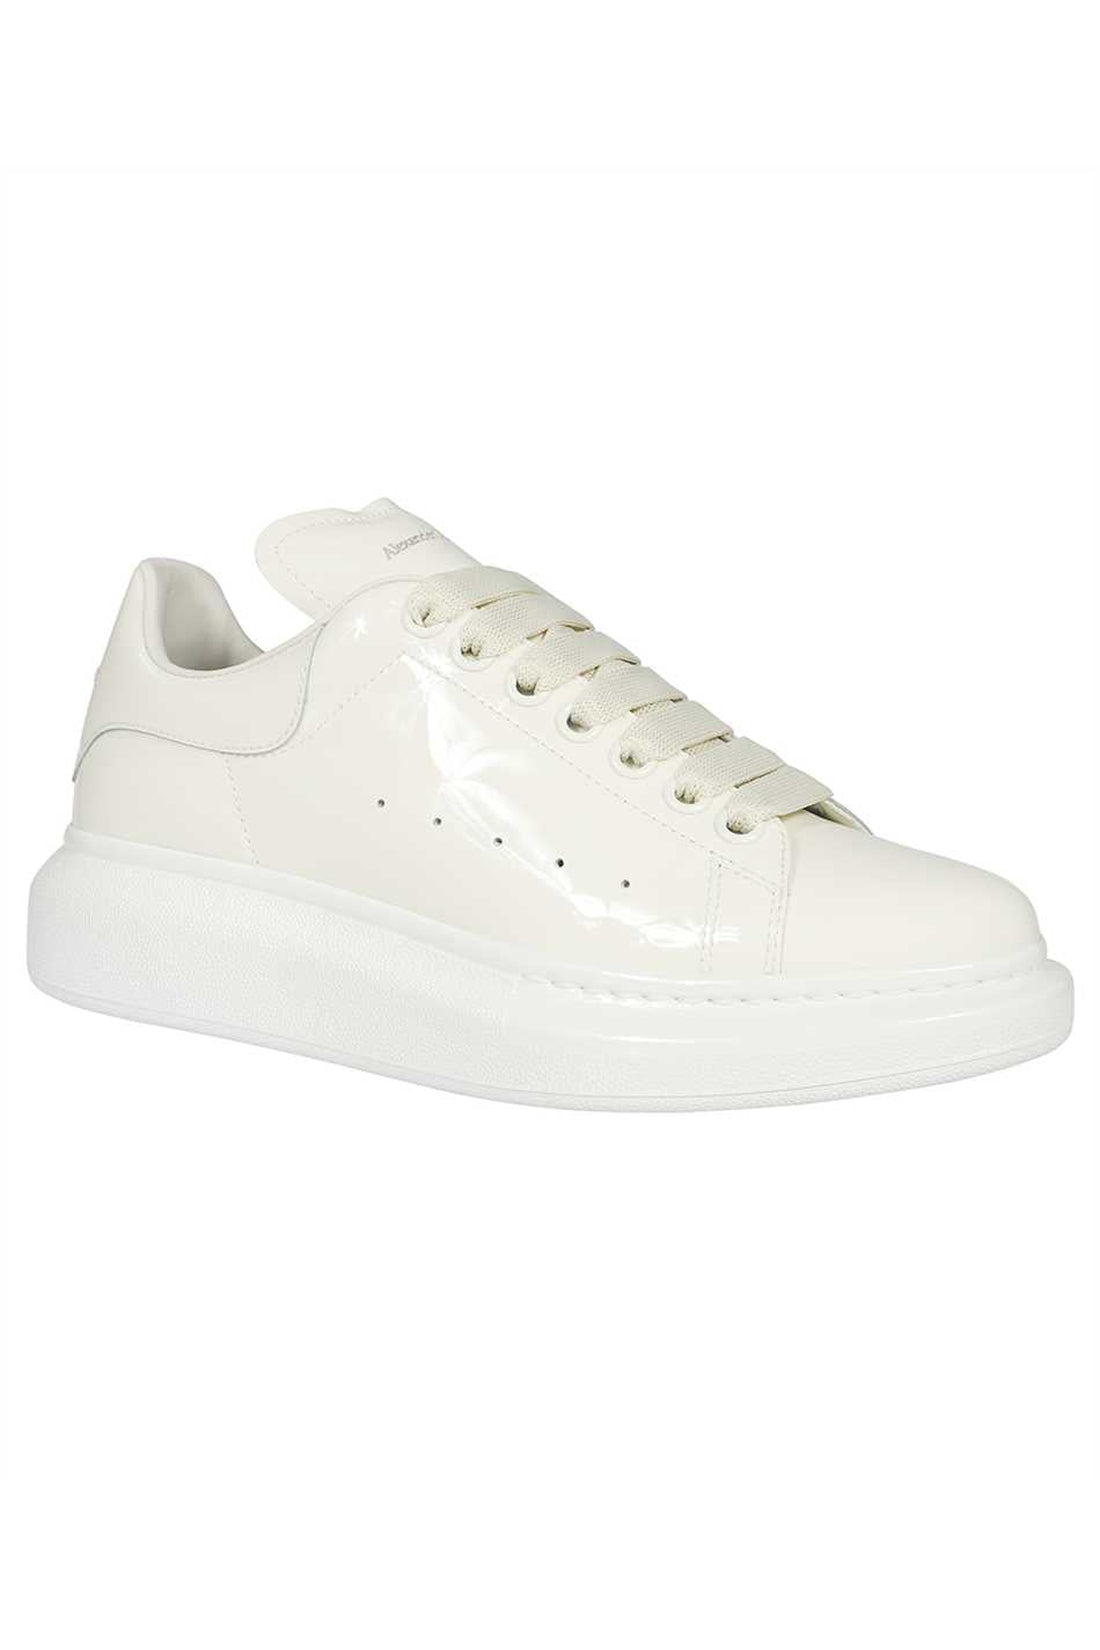 Alexander McQueen-OUTLET-SALE-Larry patent leather sneakers-ARCHIVIST